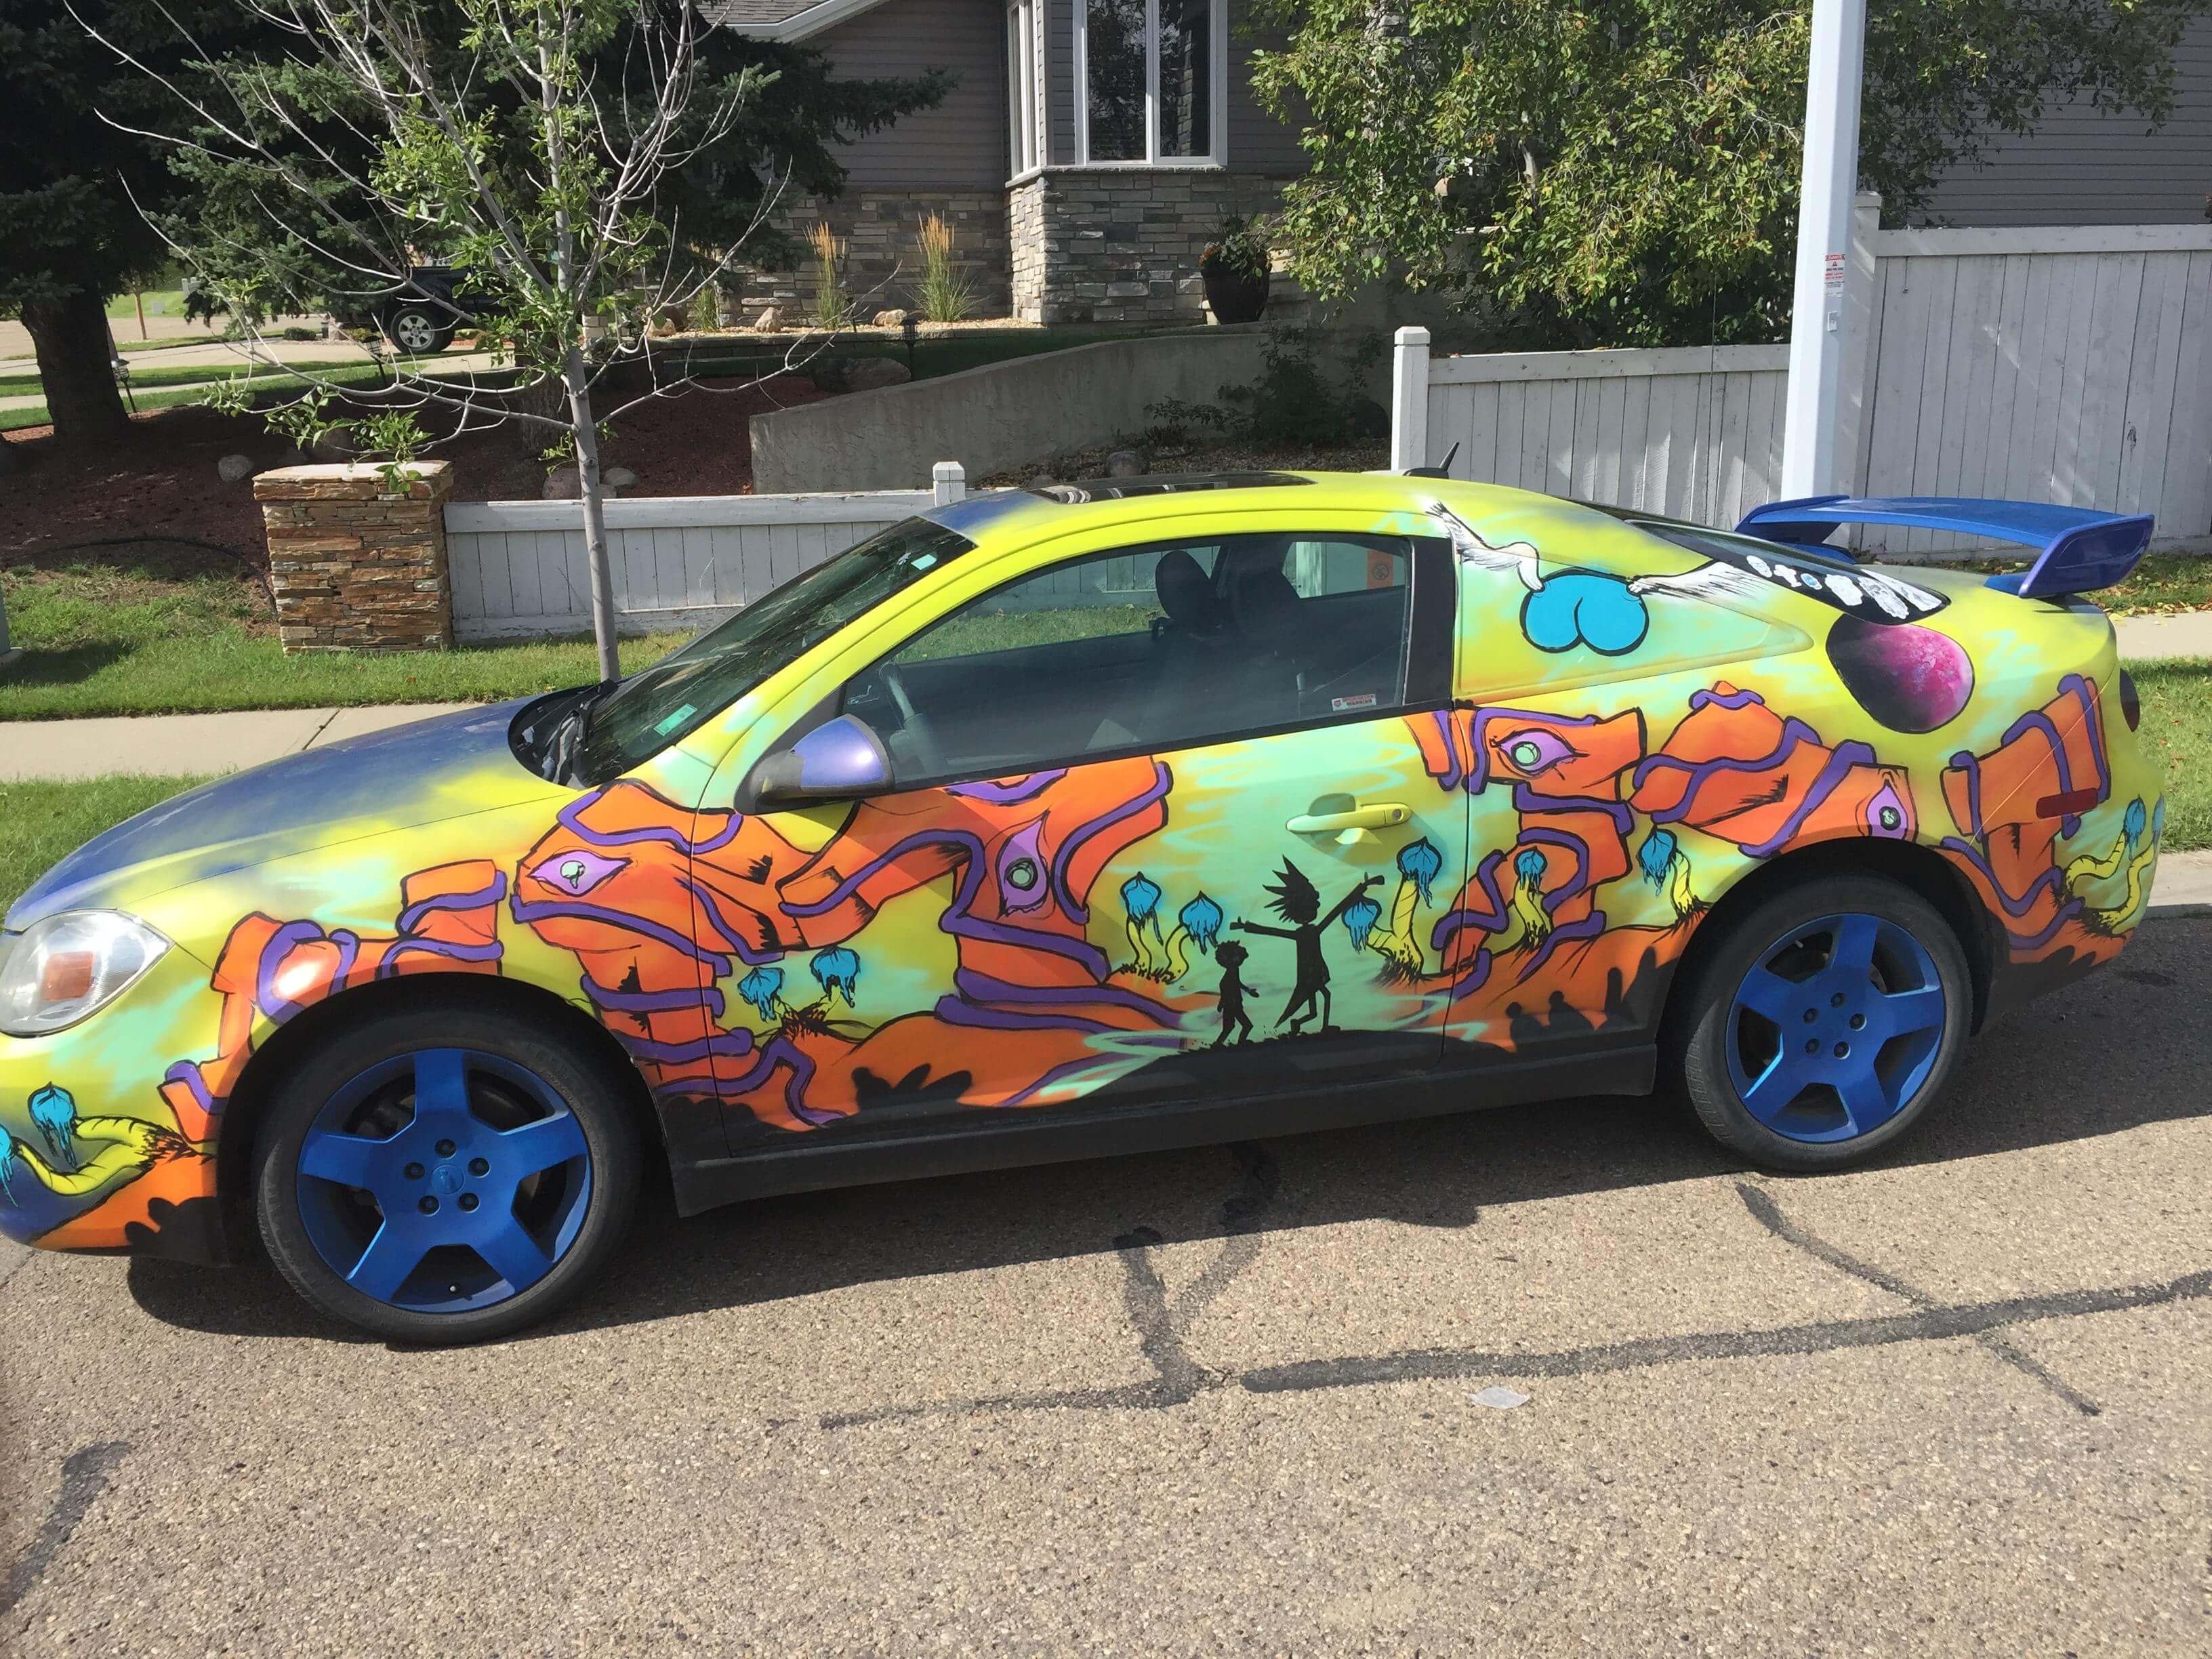 A colorful car parked on the side of the road
